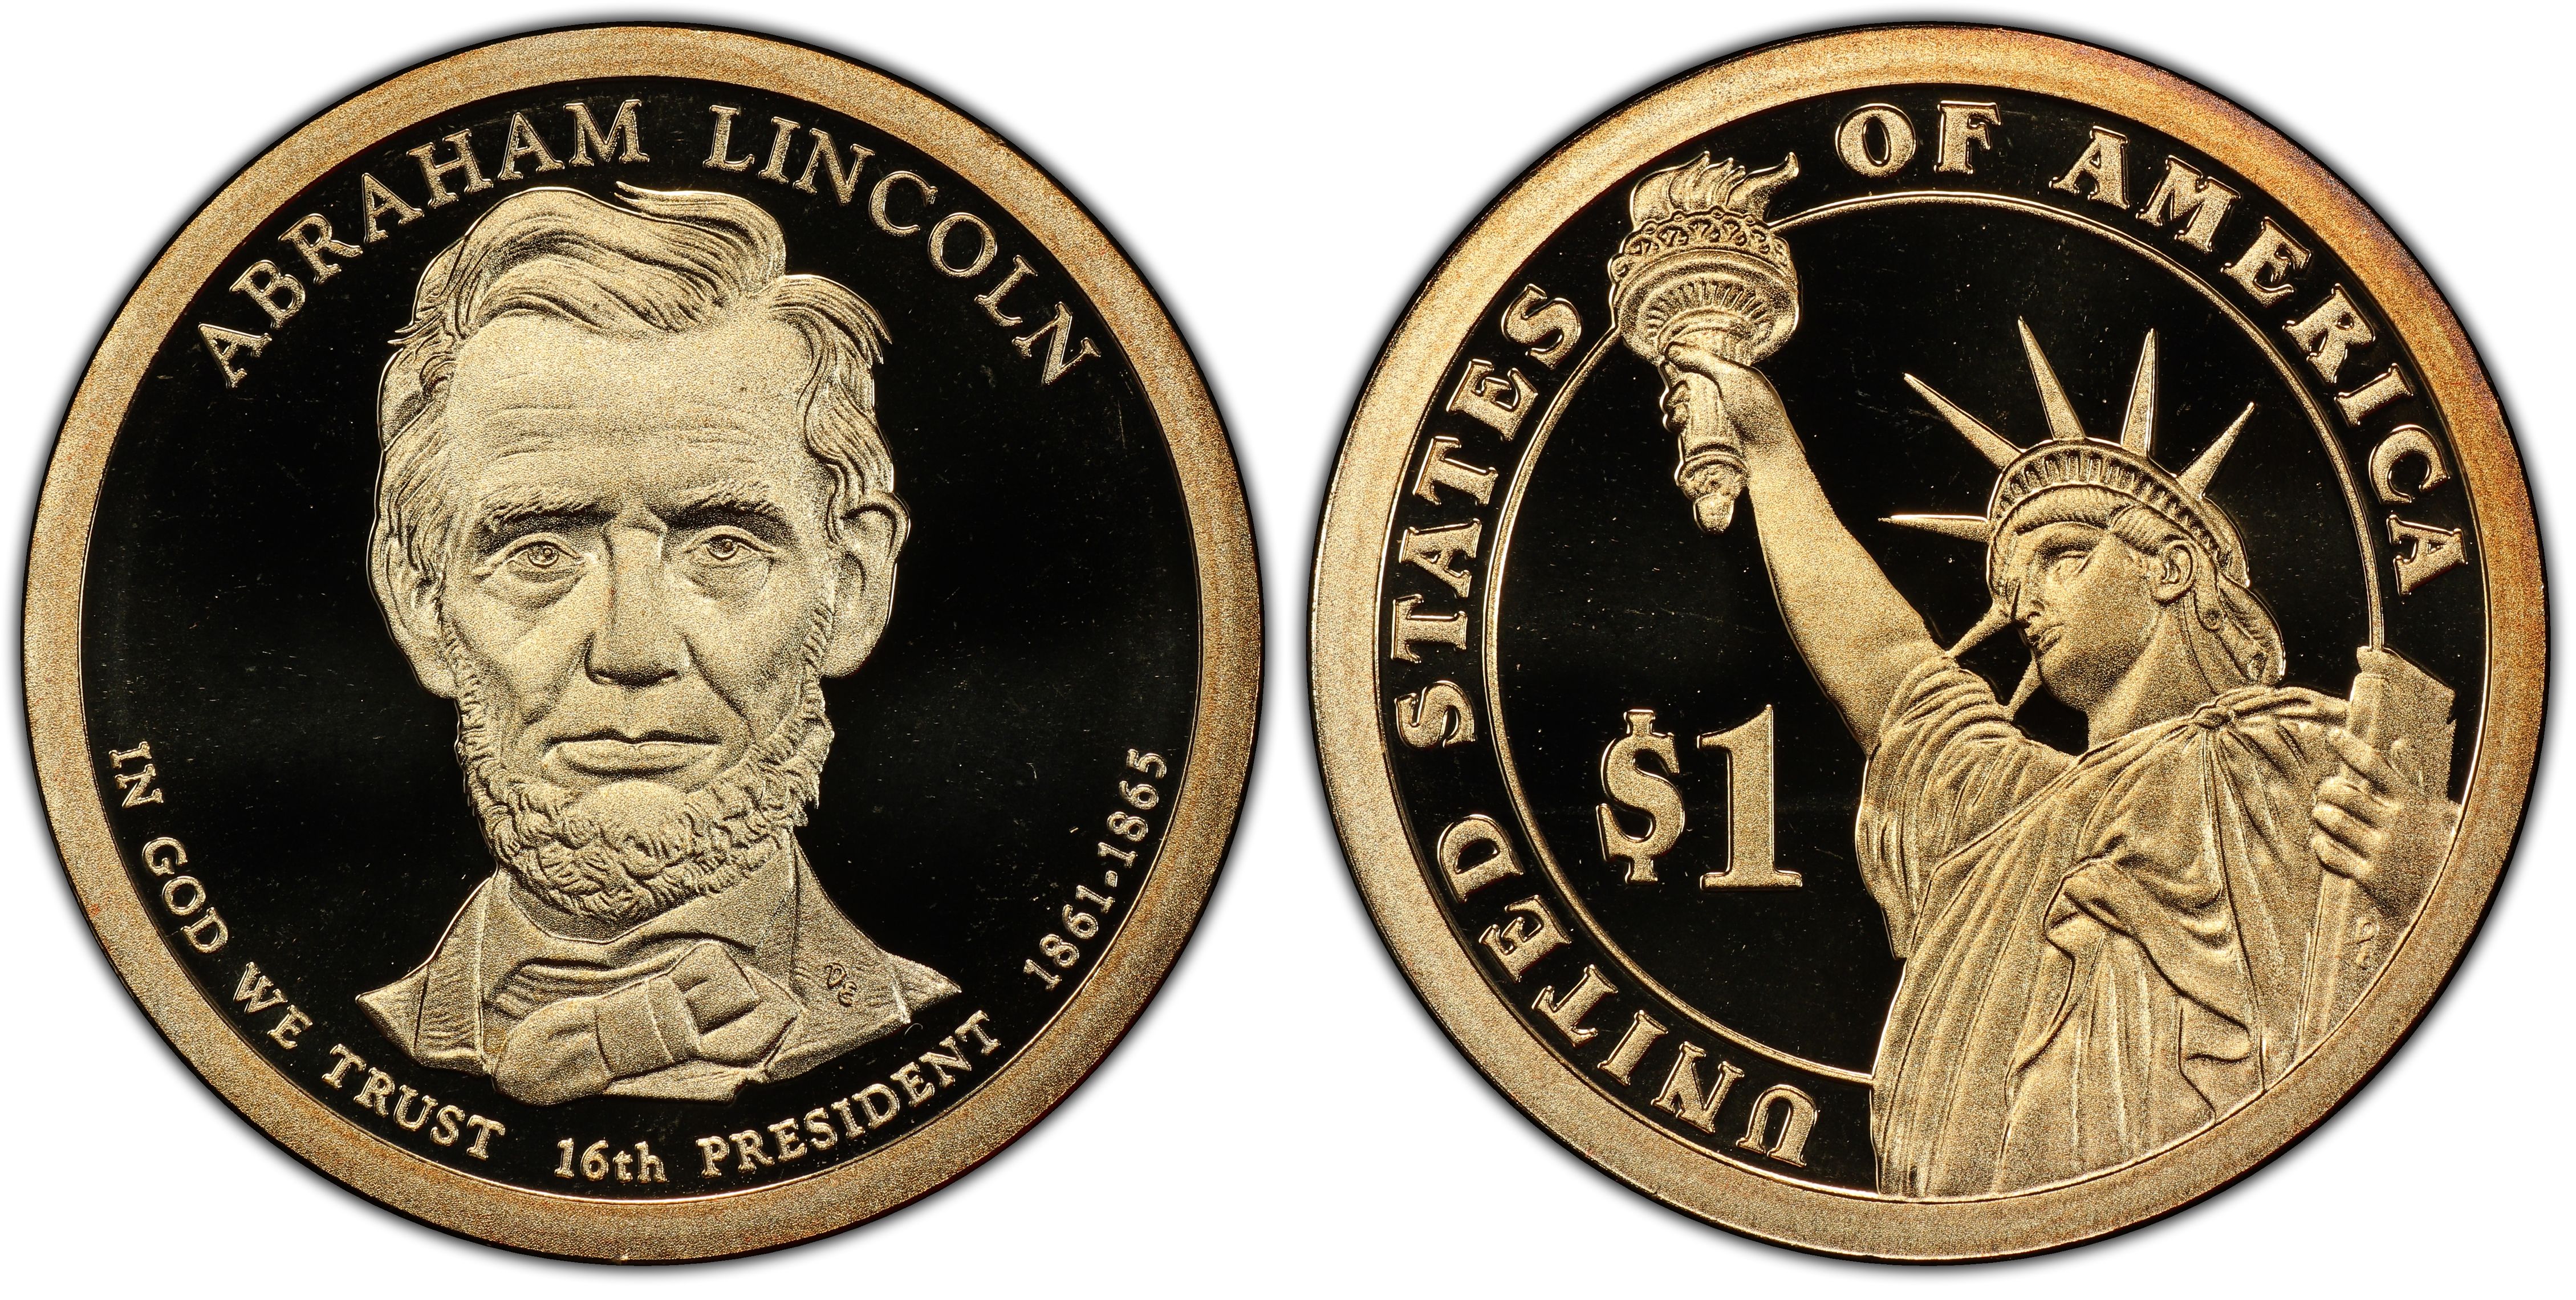 American Coin United States 1 Cent, Abraham Lincoln, 2010 - 2021